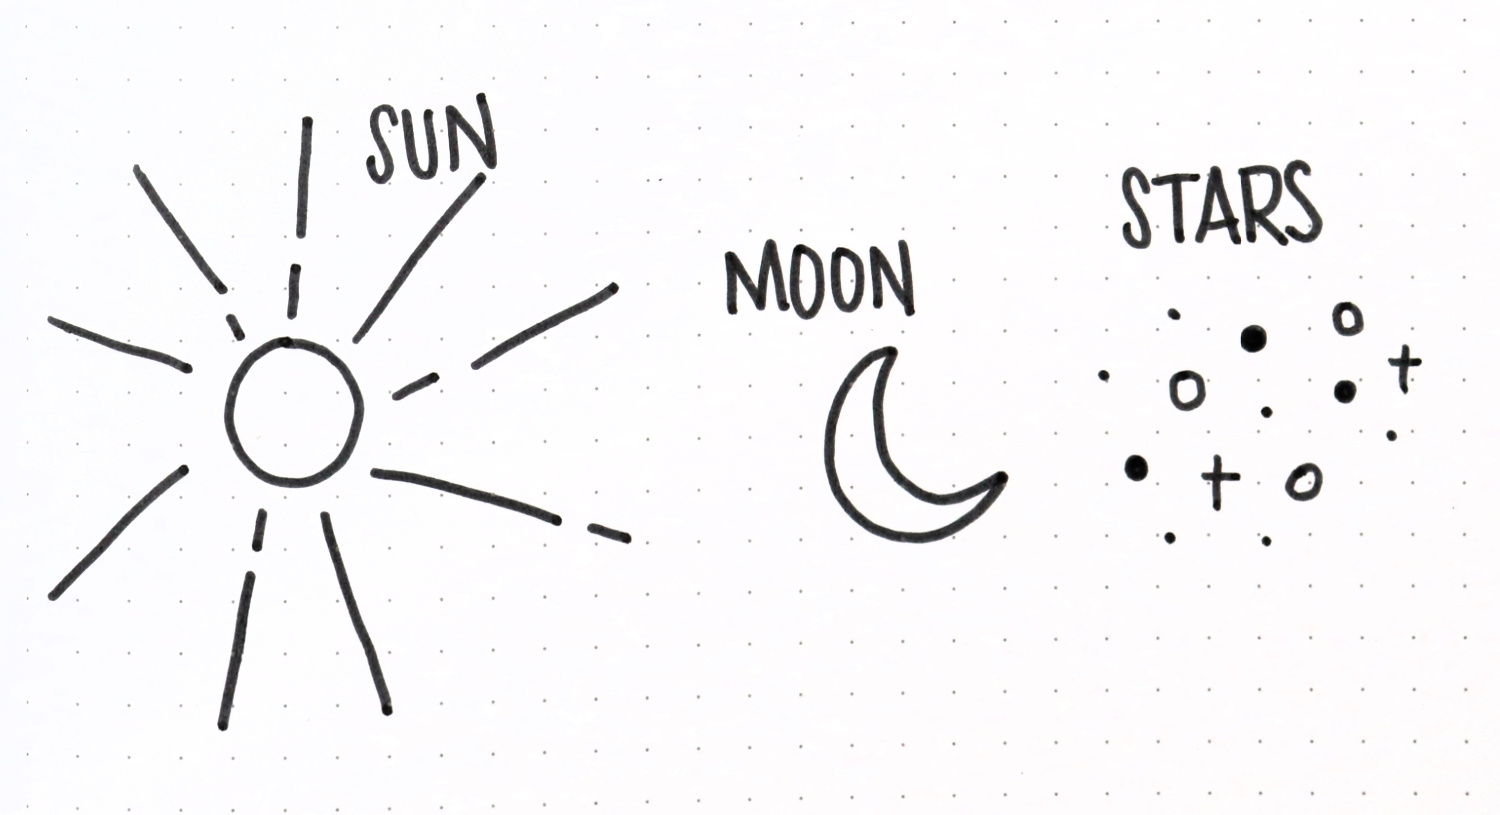 Image contains monoline drawings of the sun, moon, and stars.